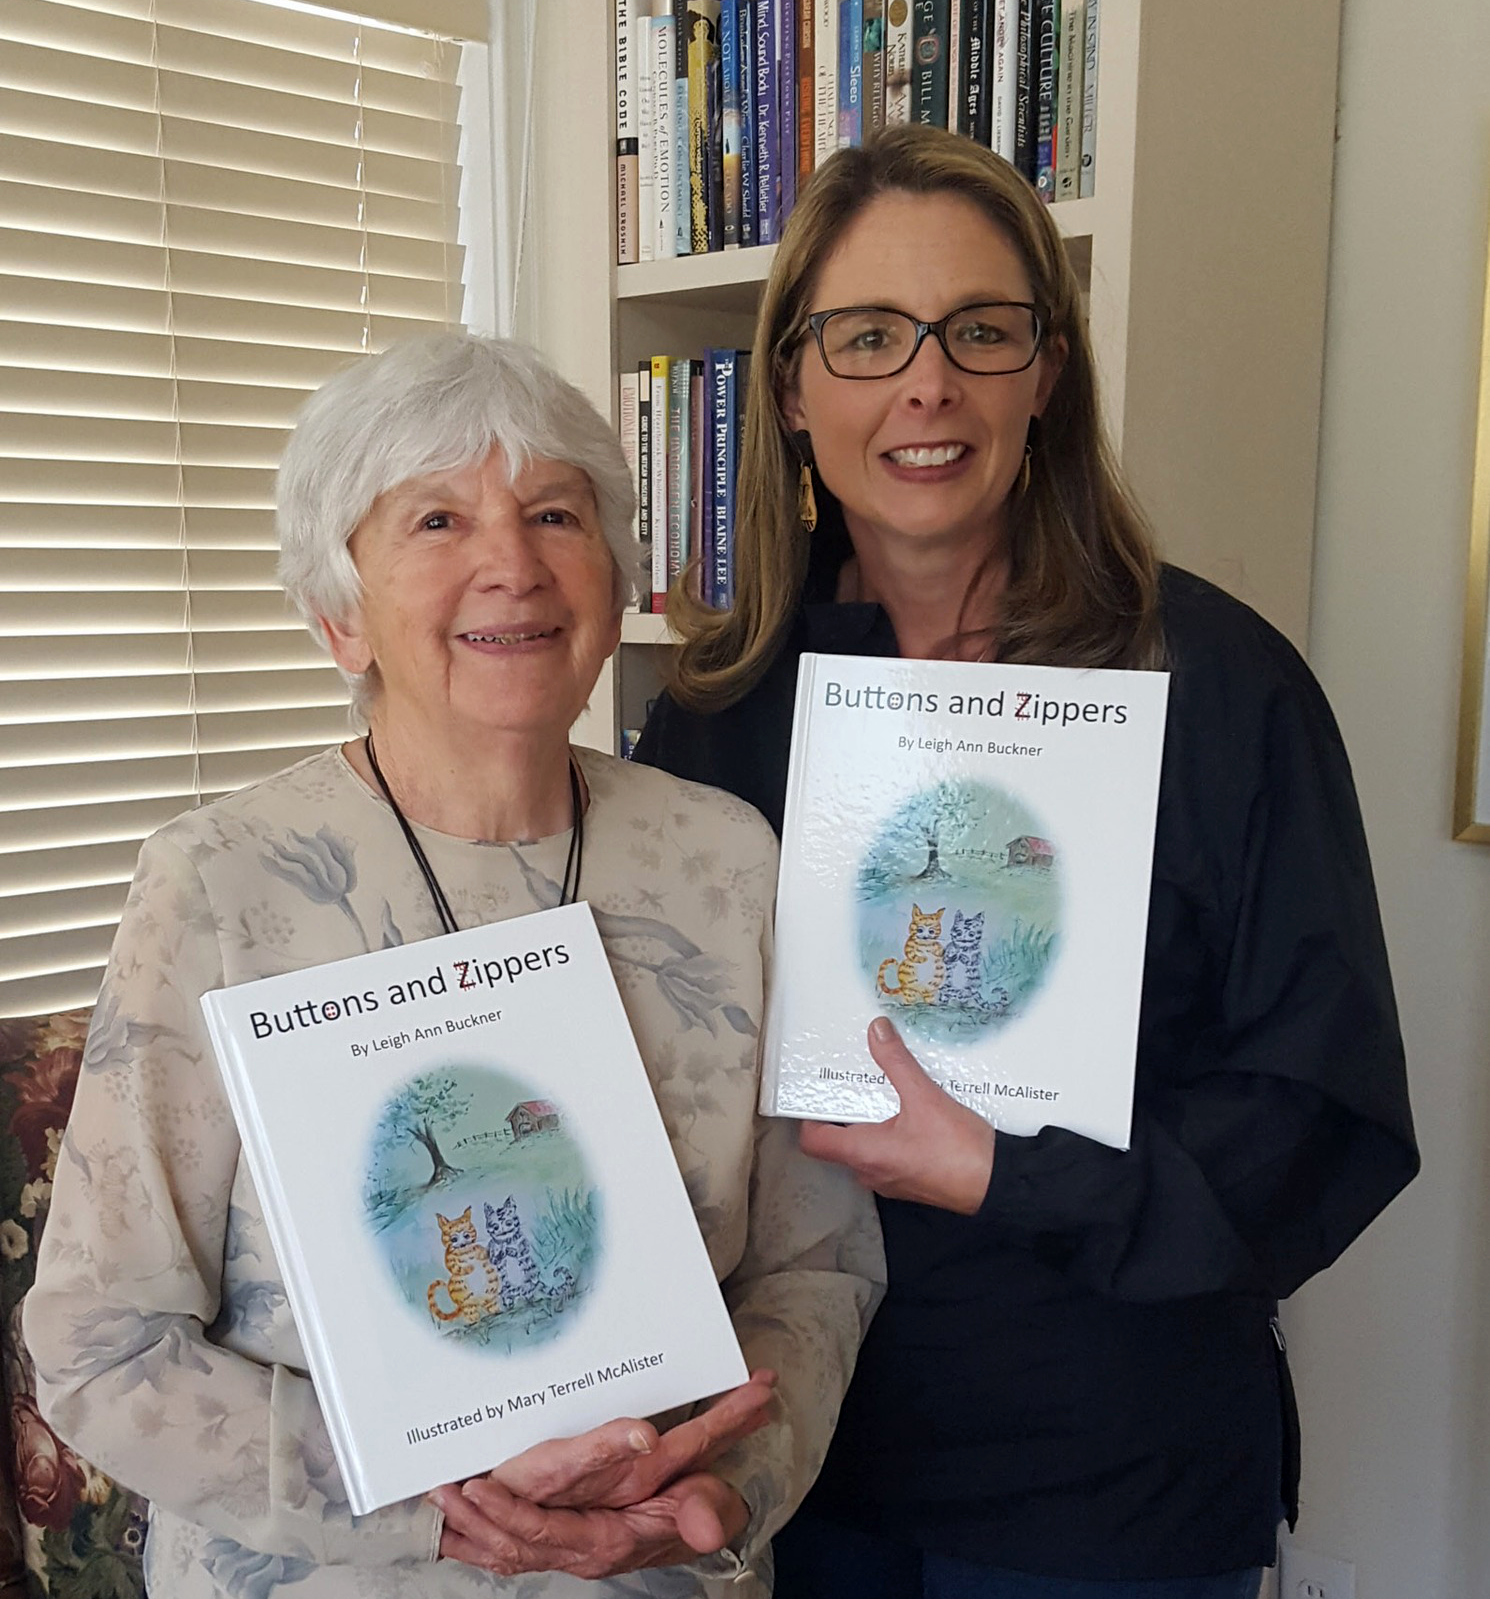 Mary McAlister and Leigh Ann Buckner holding copies of their book Buttons and Zippers